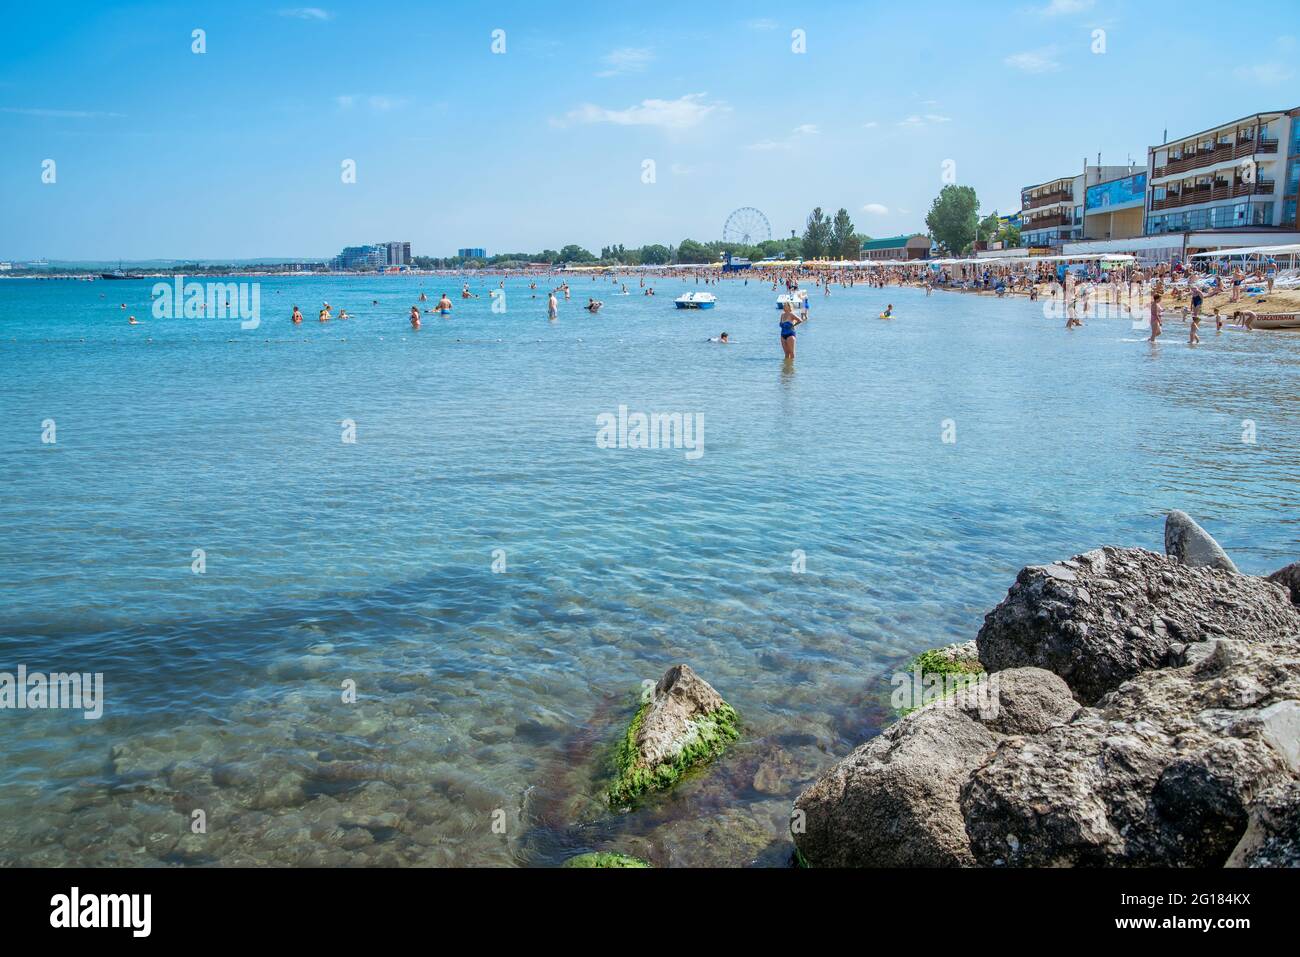 Anapa Russia July 1 2020 A Resort Town In Southern Russia The Black